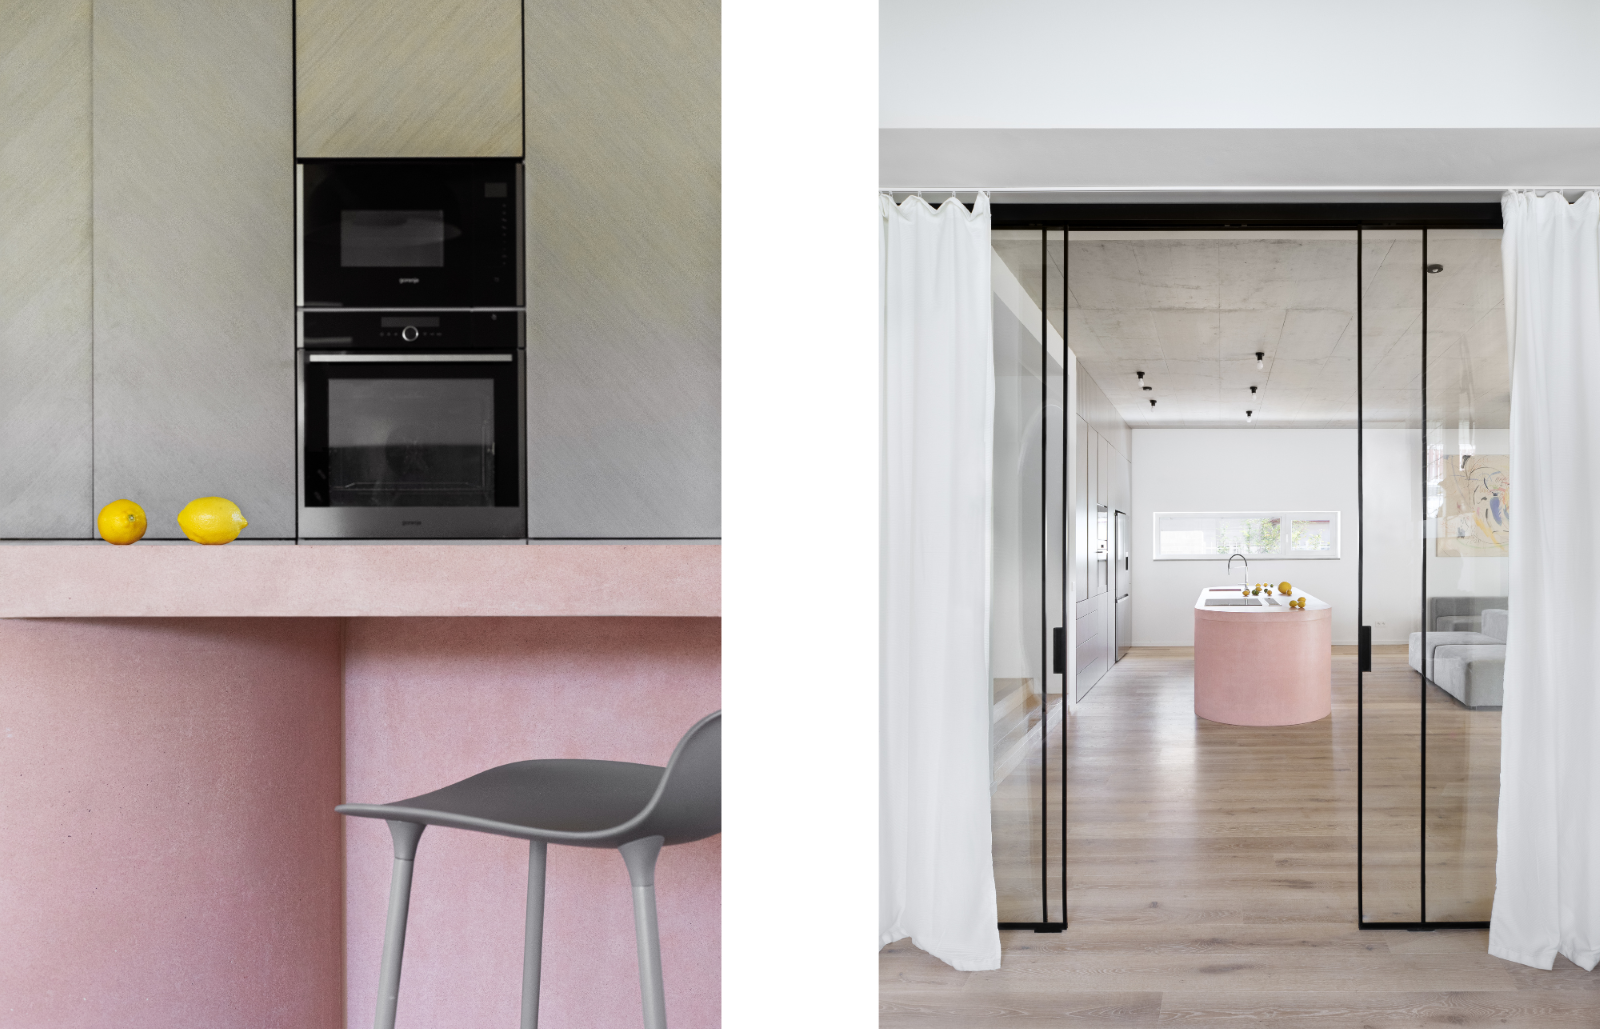 A pink kitchen island became the room’s highlight: fascinating and smile inducing!